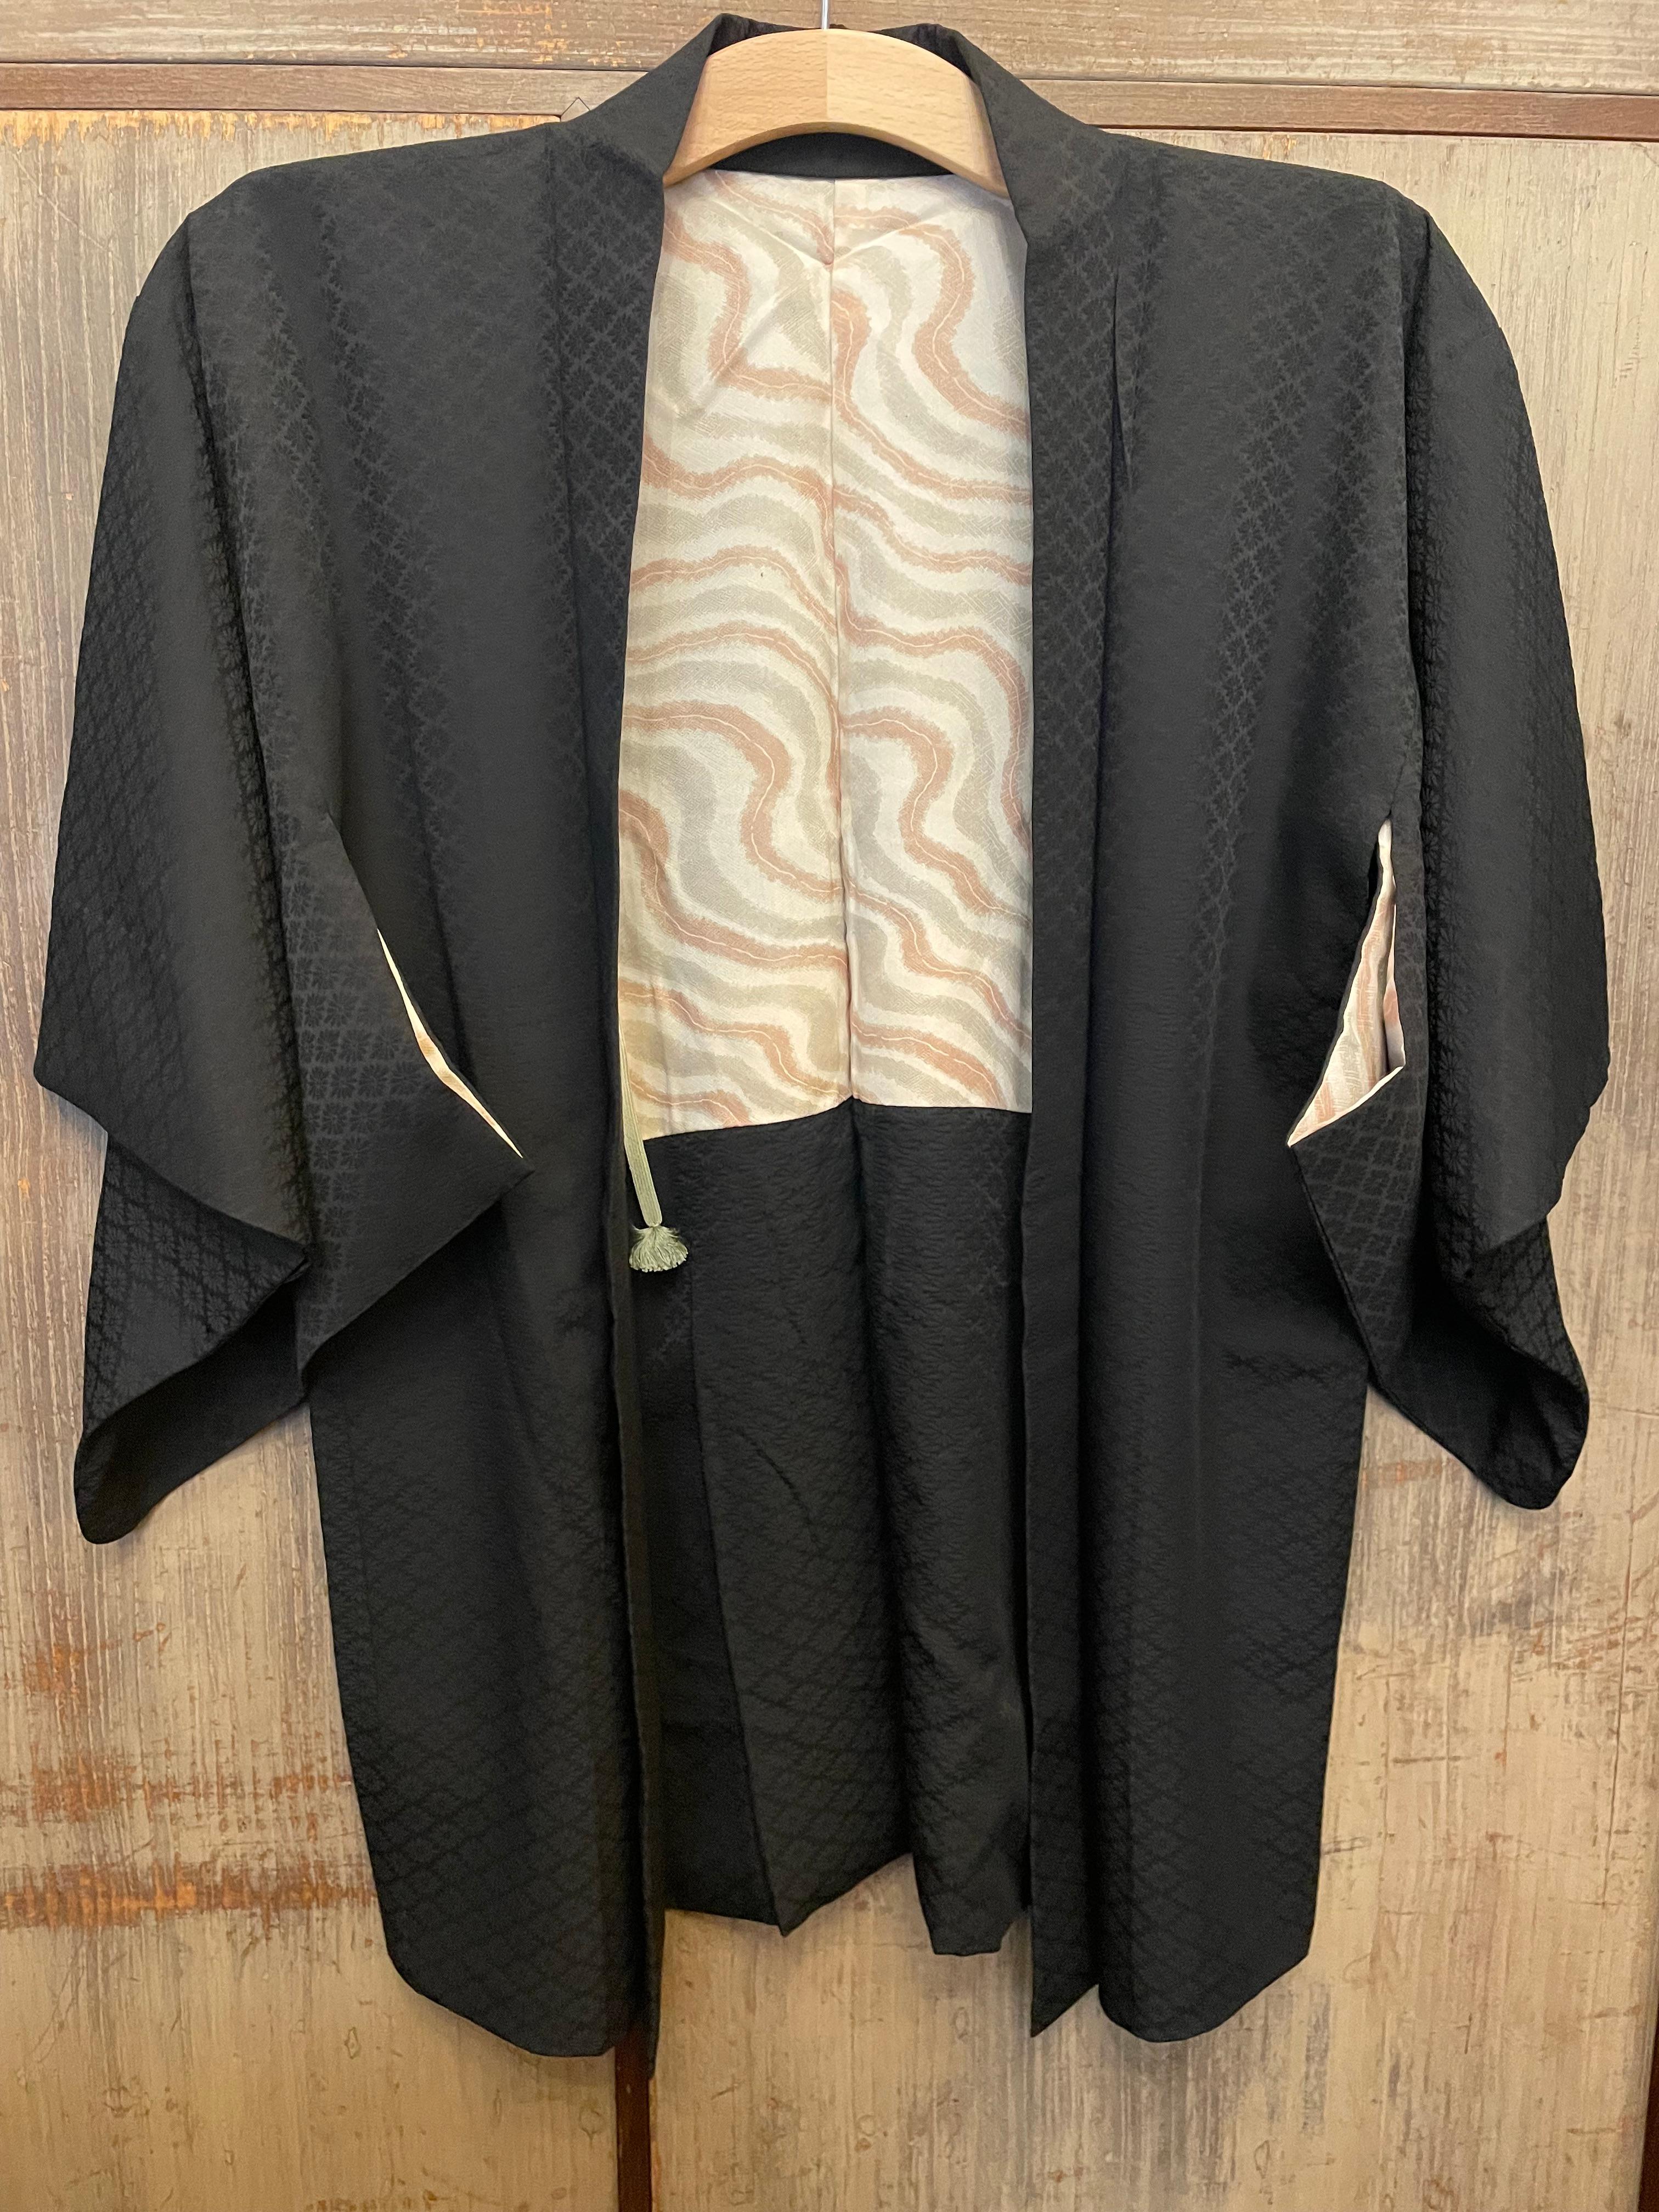 This is a silk jacket which was made in Japan.
It was made in Showa era around 1980s.
This haori jacket has a family crest of  MaruniChigaiTakanoHaMon.

The haori is a traditional Japanese hip- or thigh-length jacket worn over a kimono. Resembling a